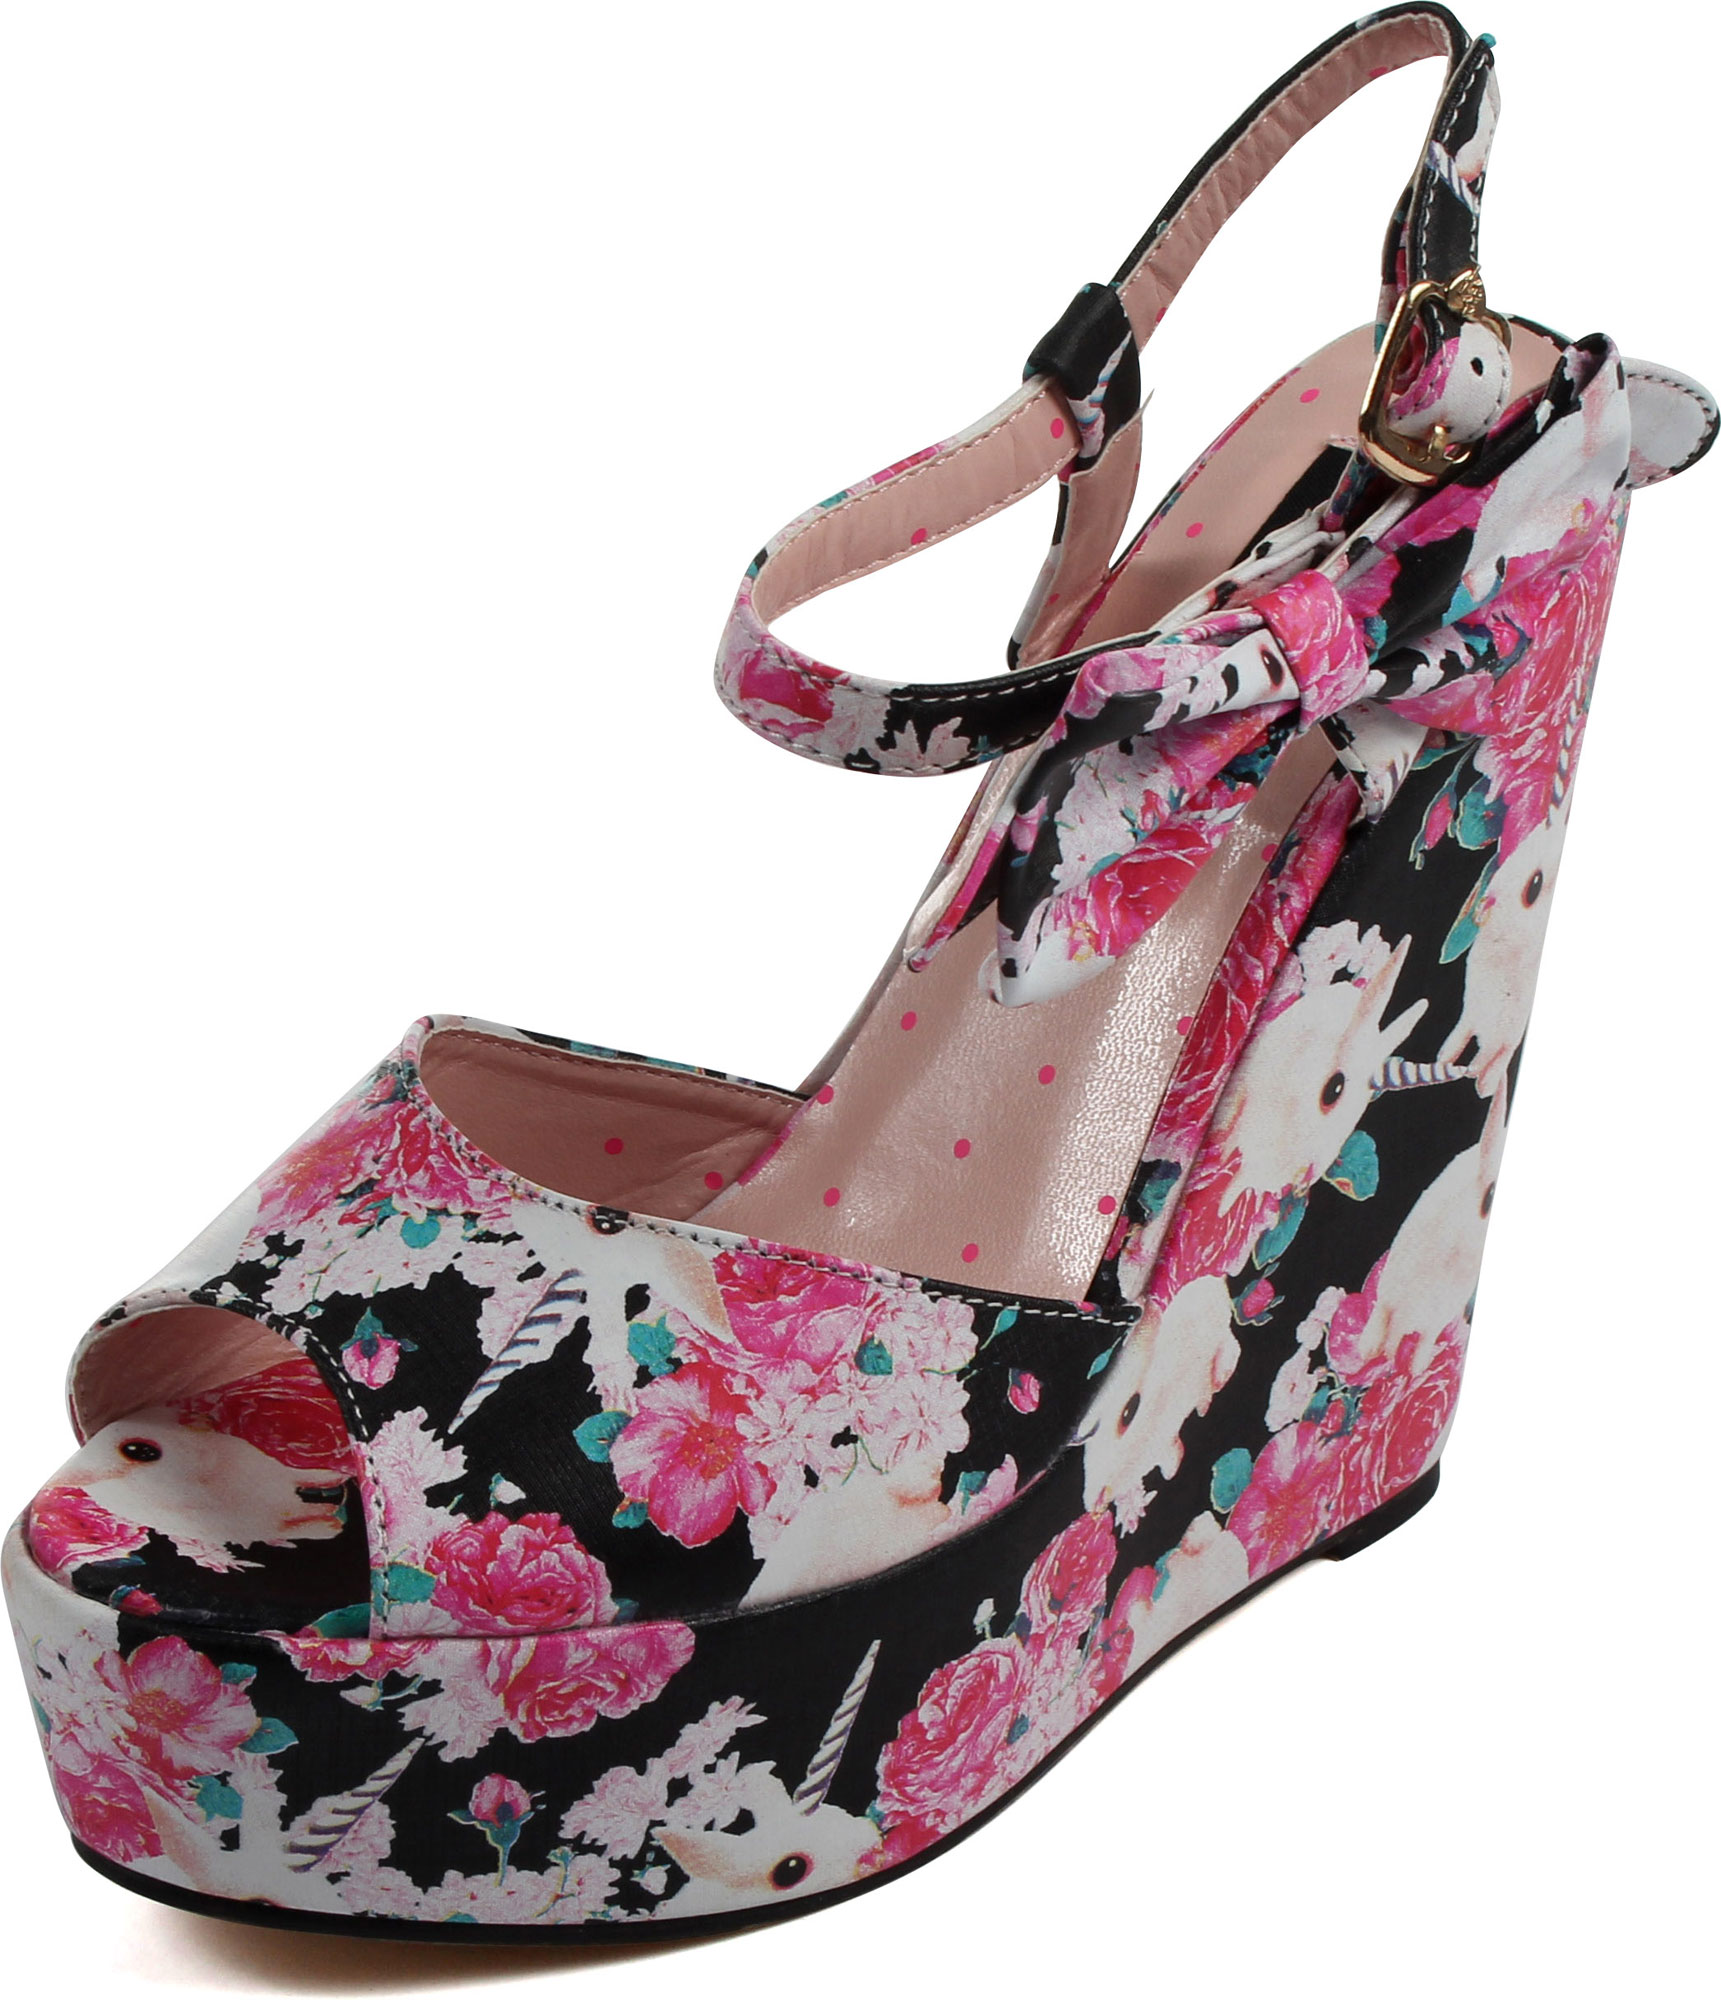 Iron Fist - Womens Buns N' Roses Wedge